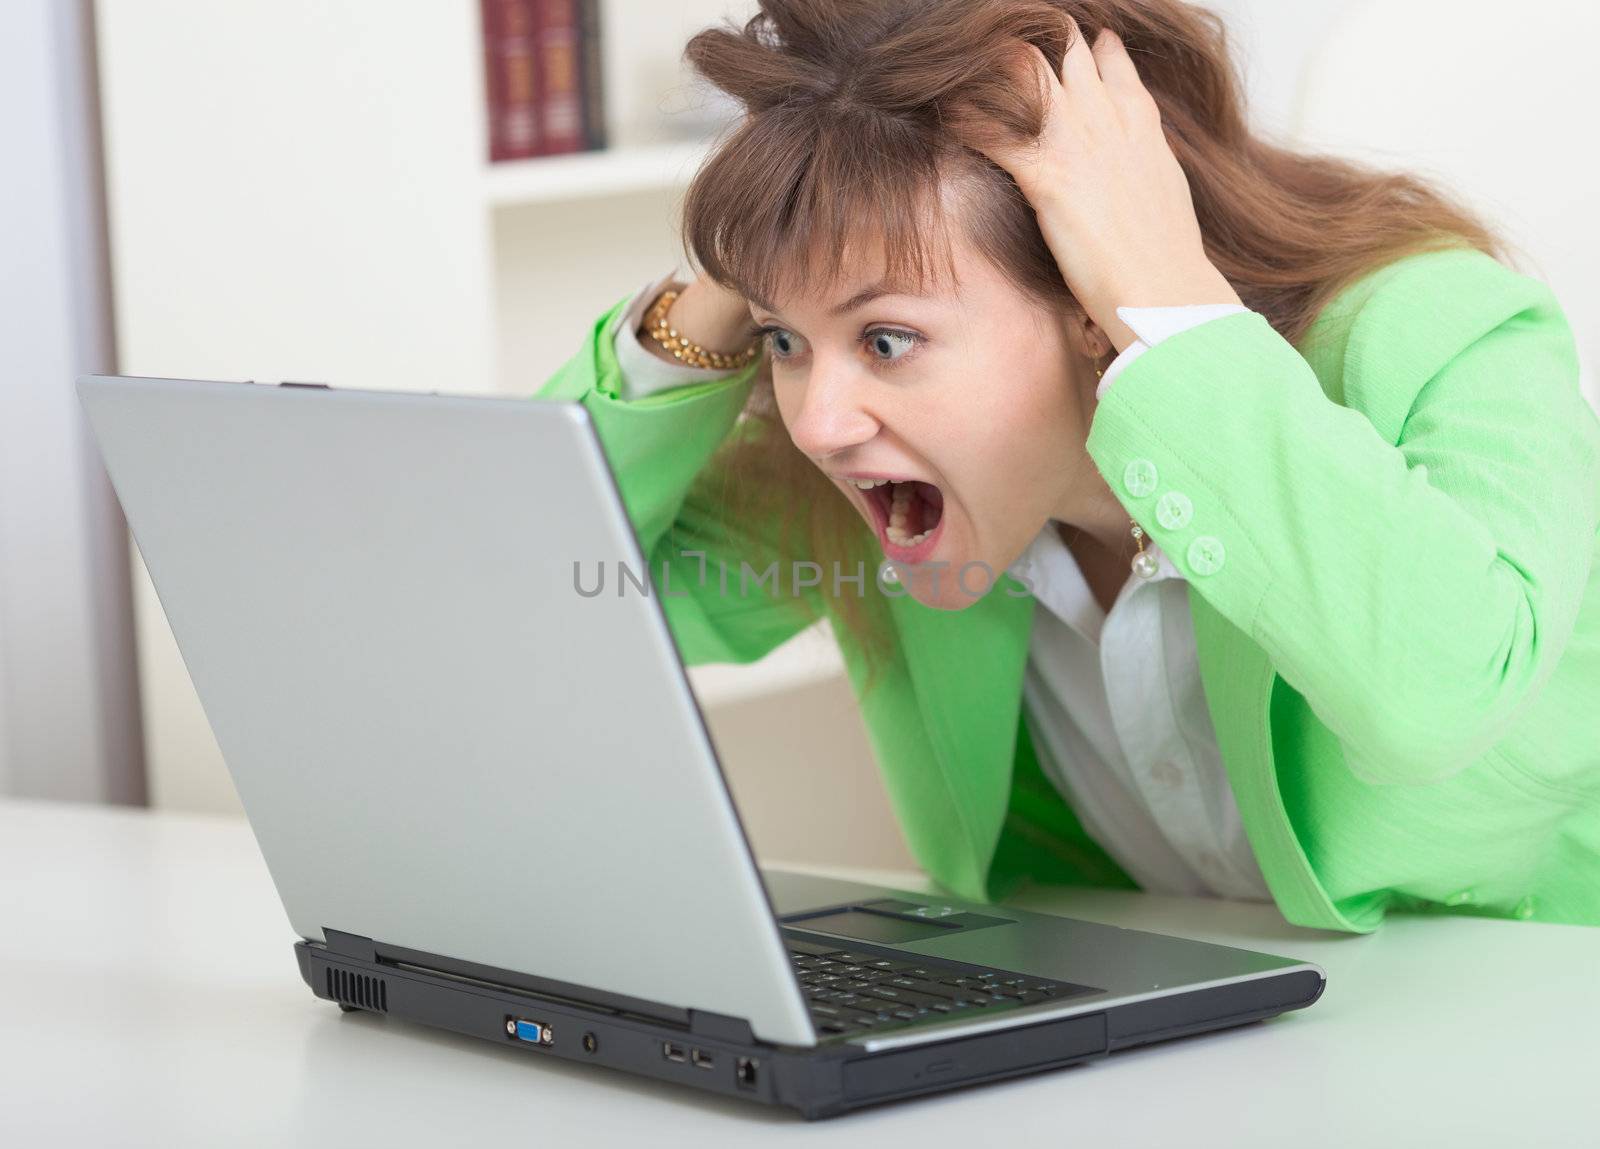 Young girl shouts looking in laptop screen by pzaxe